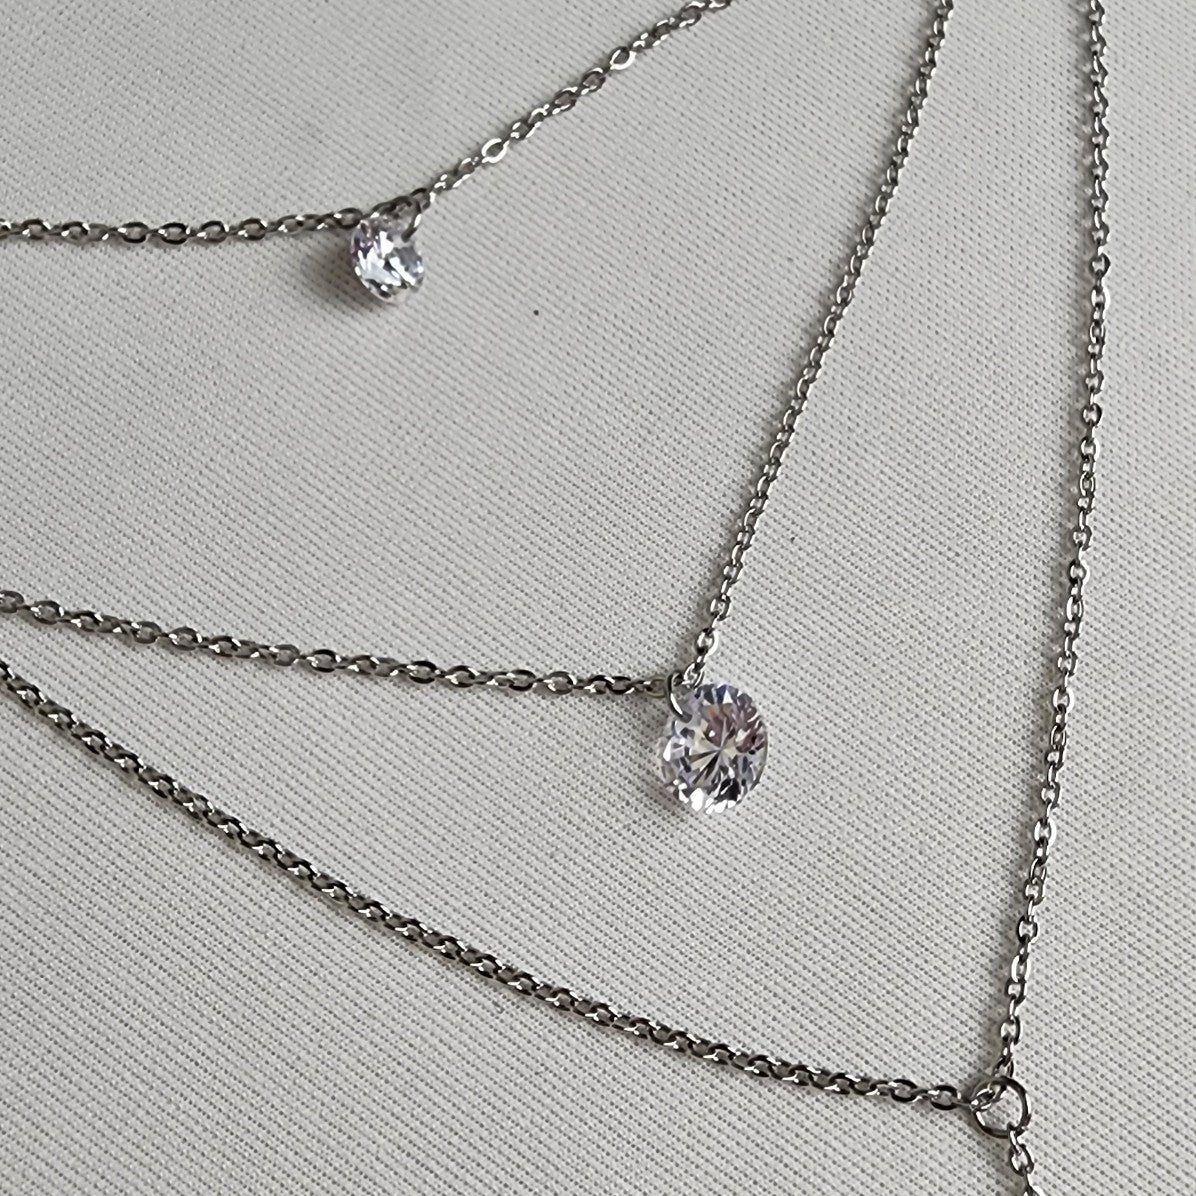 Steel X Stainless Steel Crystal Pendant Layered Delicate Chain Necklace